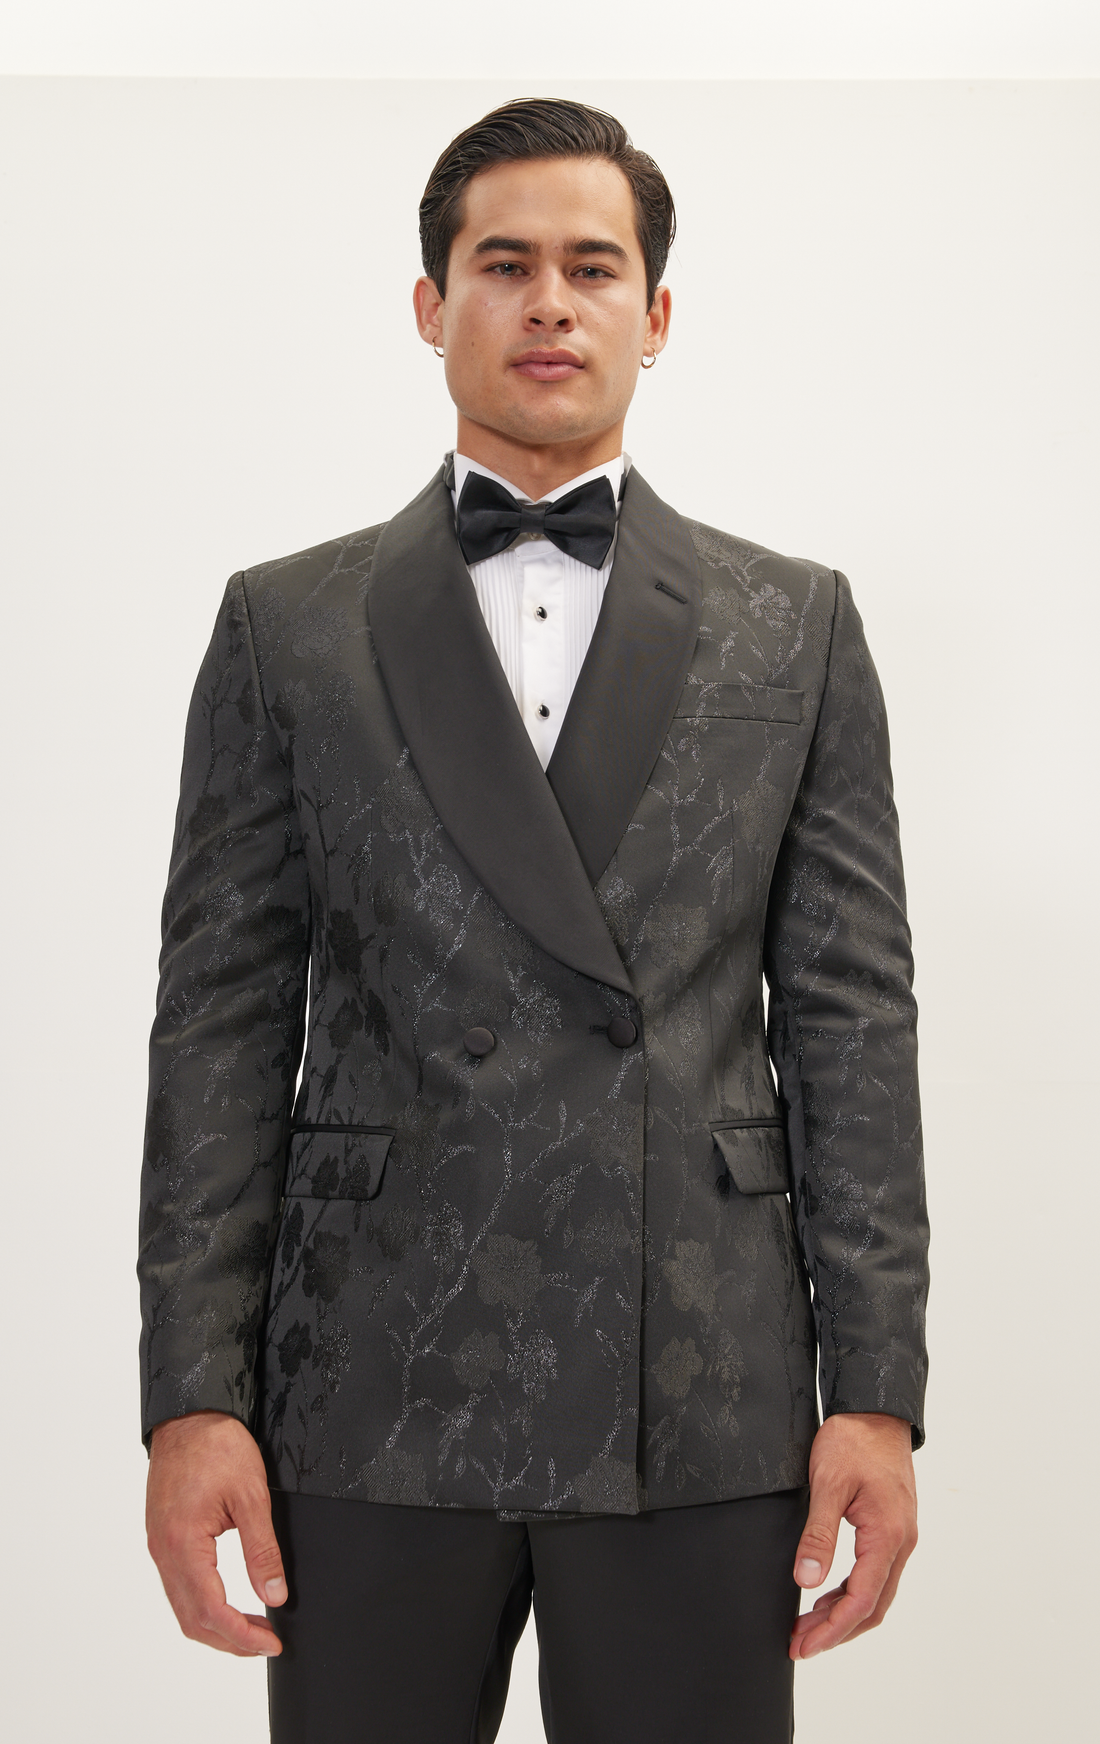 N° R203 MIDNIGHT FLORAL DOUBLE BREASTED TUXEDO JACKET - BLACK